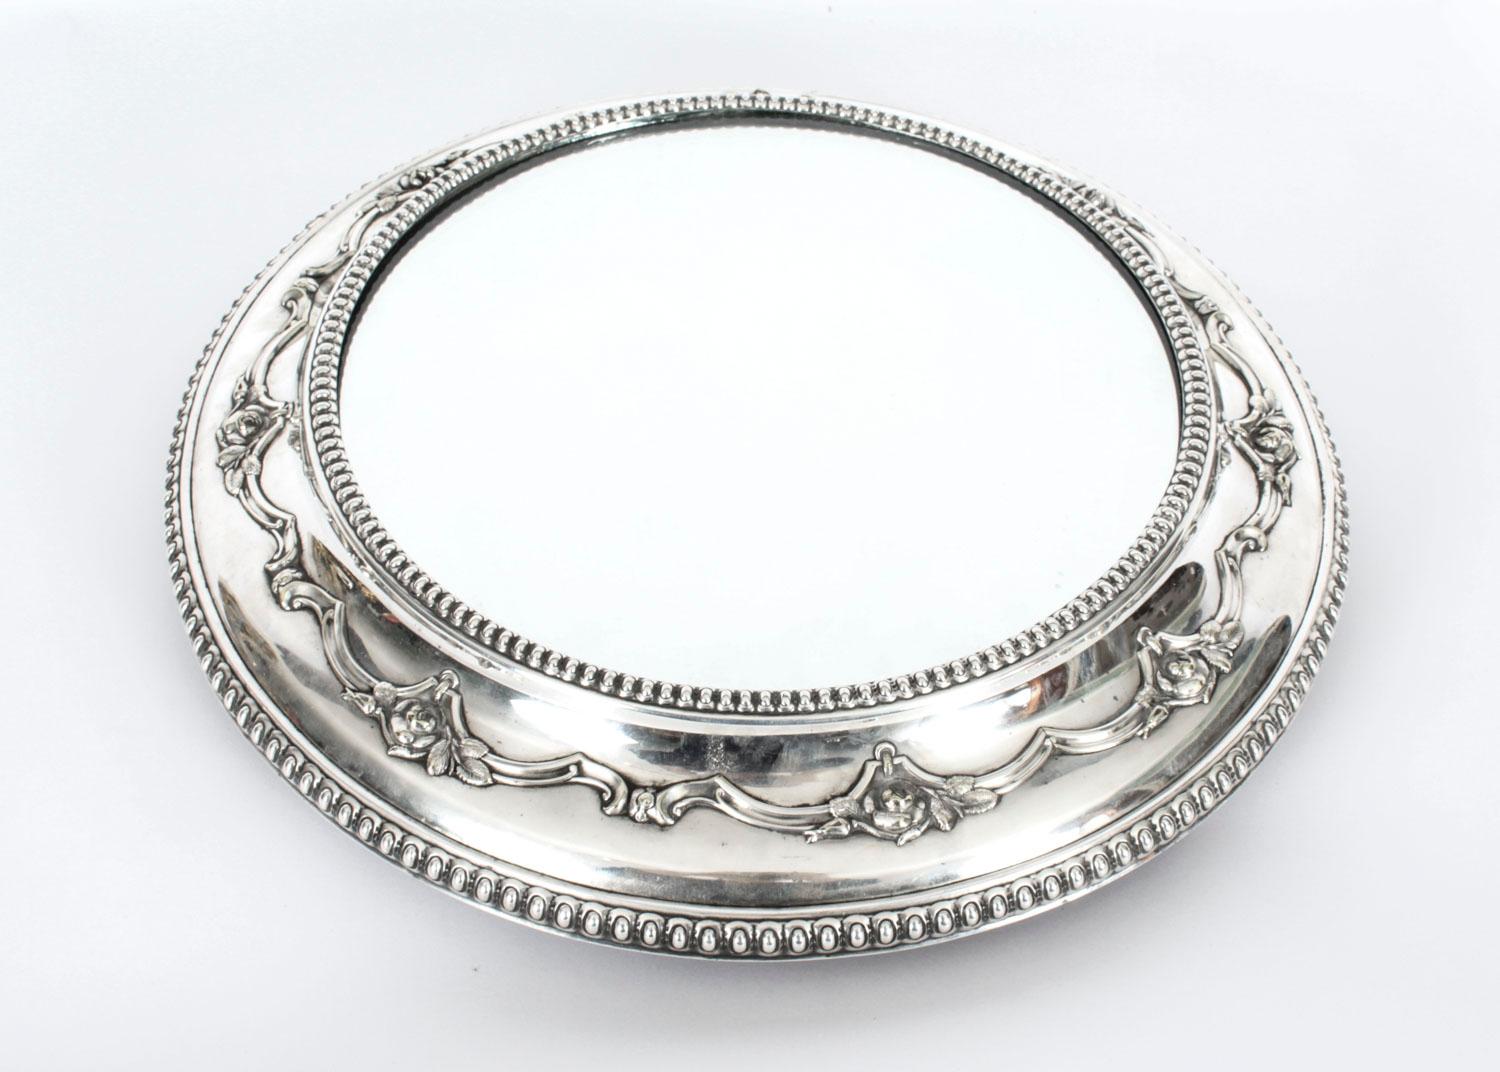 This is a large fabulous antique Victorian silver plated cake stand with the original mirrored plate Circa 1880 in date.
 
The circular stand features beaded egg and dart borders framing foliate and scroll cast decoration with a central mirrored